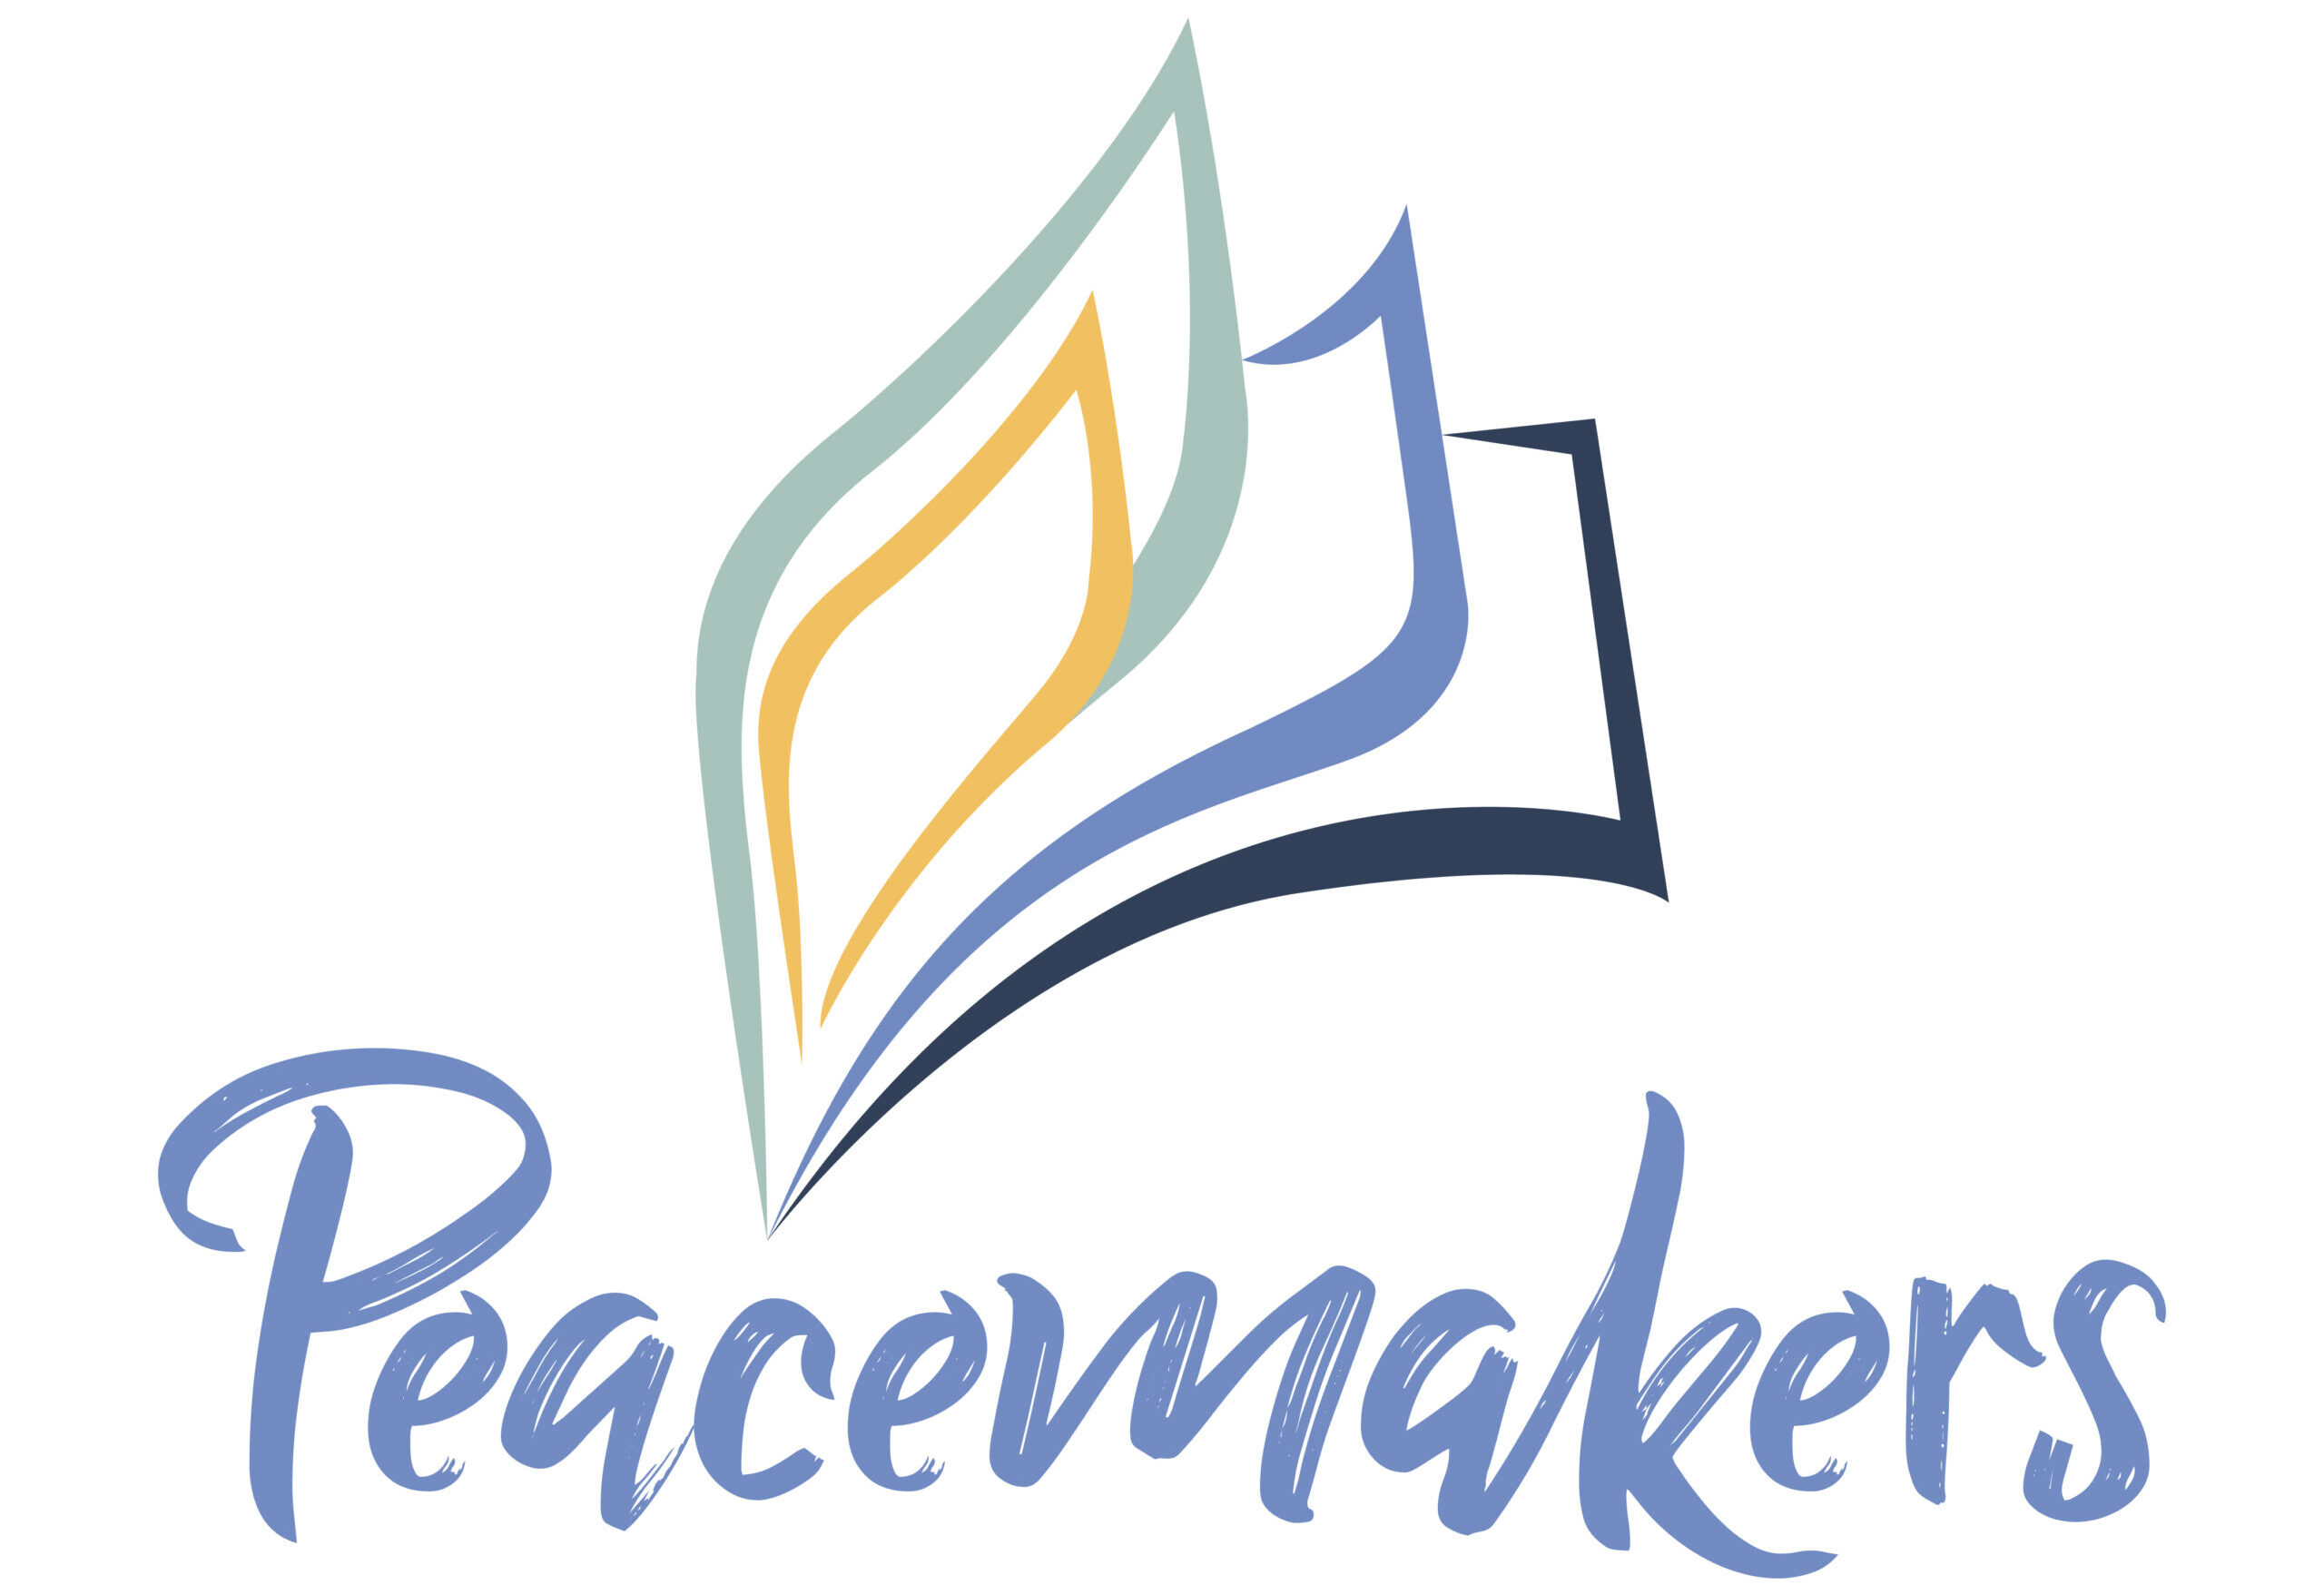 cropped-PEACEMAKER_2021-LOGO-FINAL-01-scaled-2.jpg